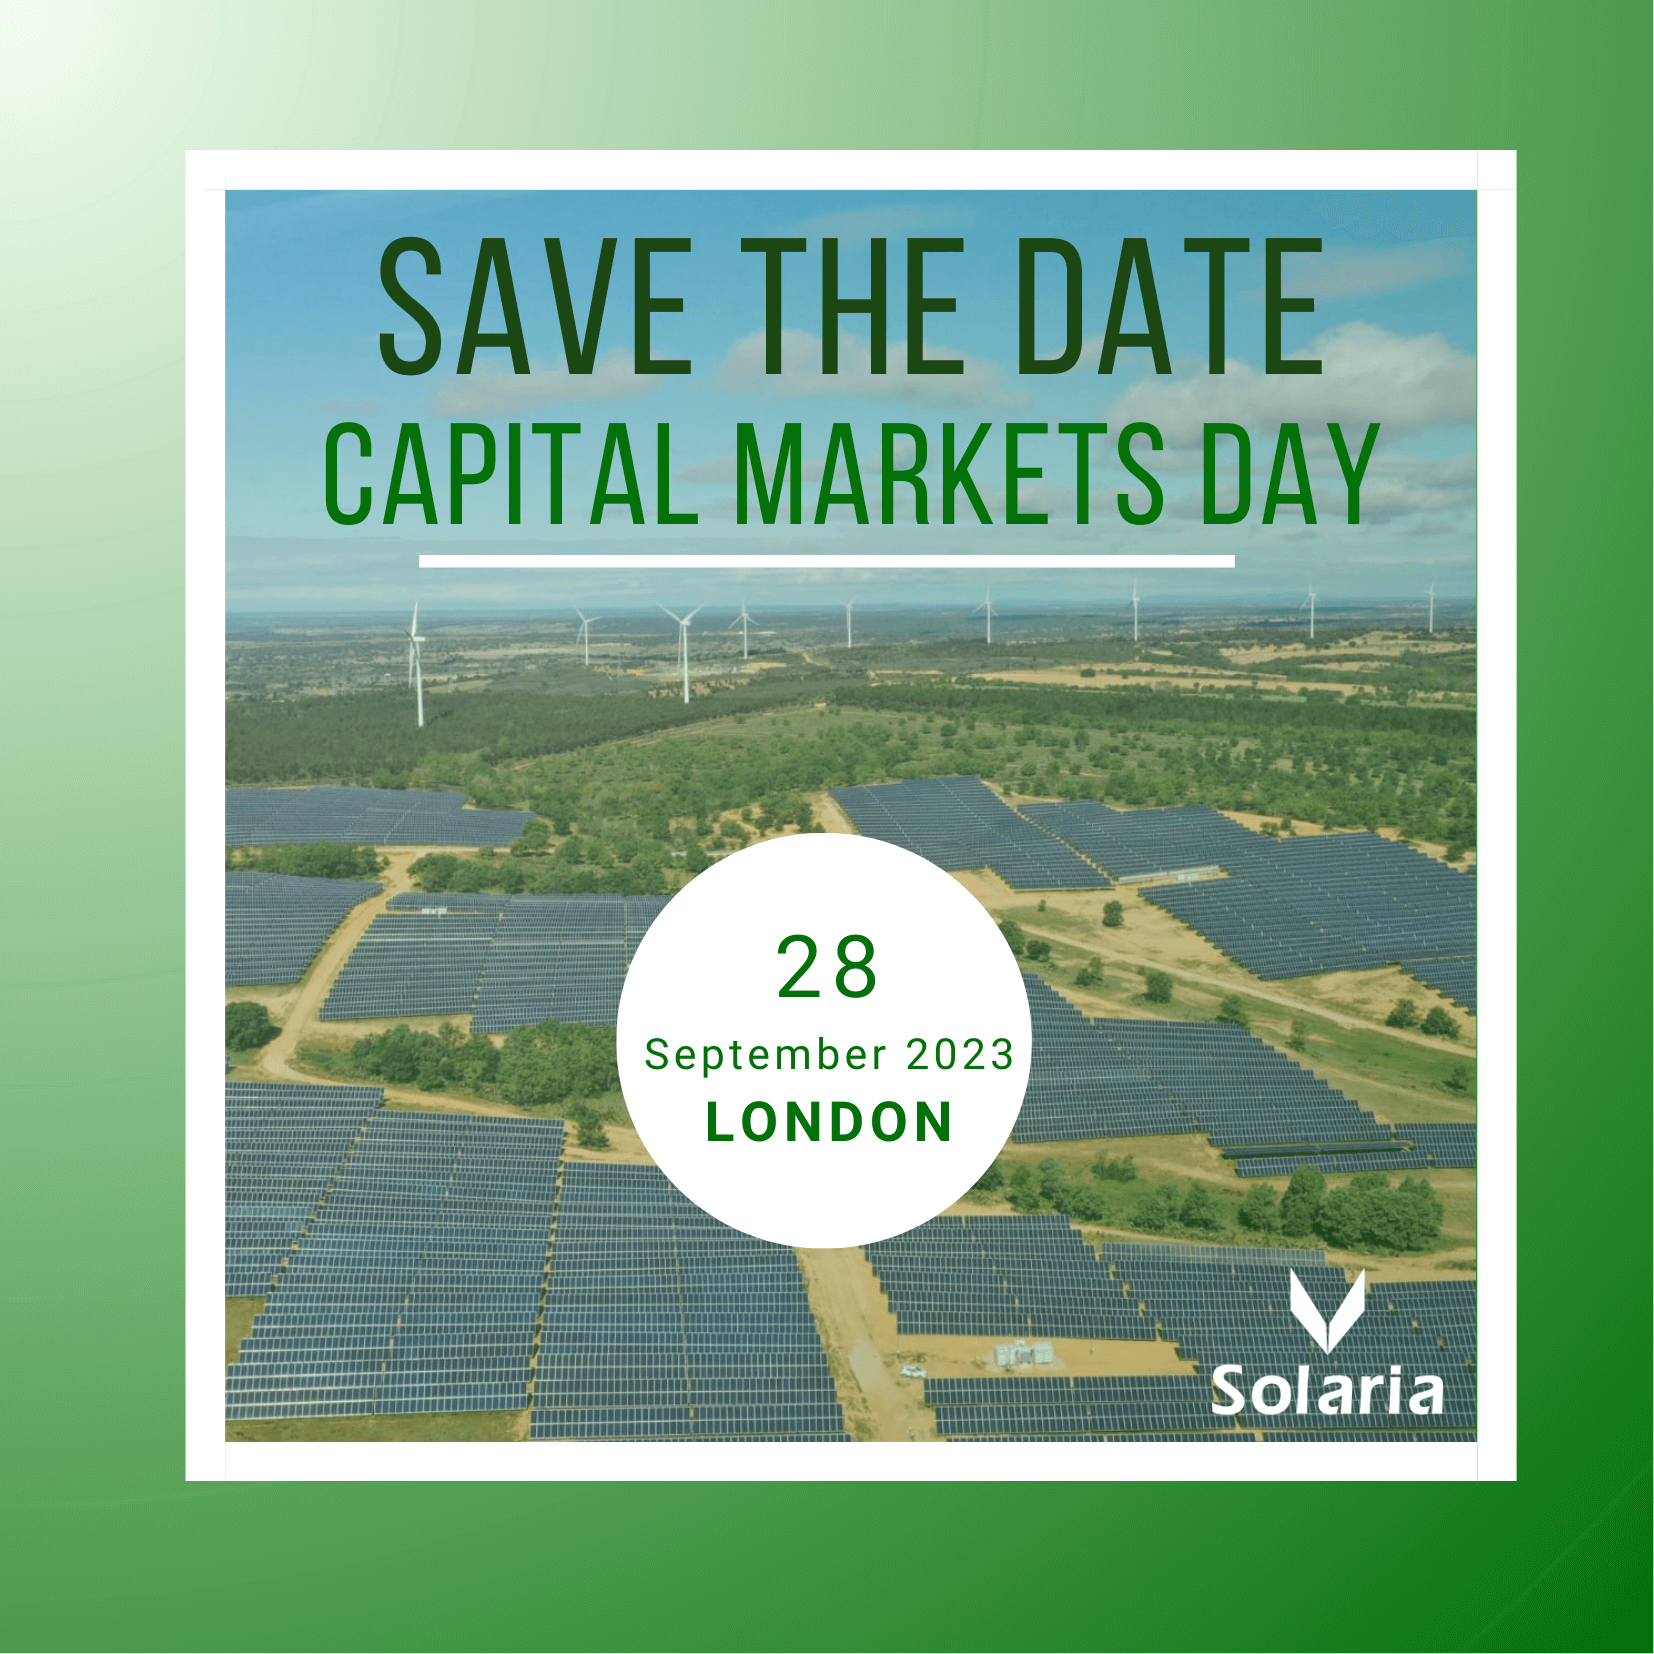 Solaria will hold its Capital Markets Day on September 28th in London